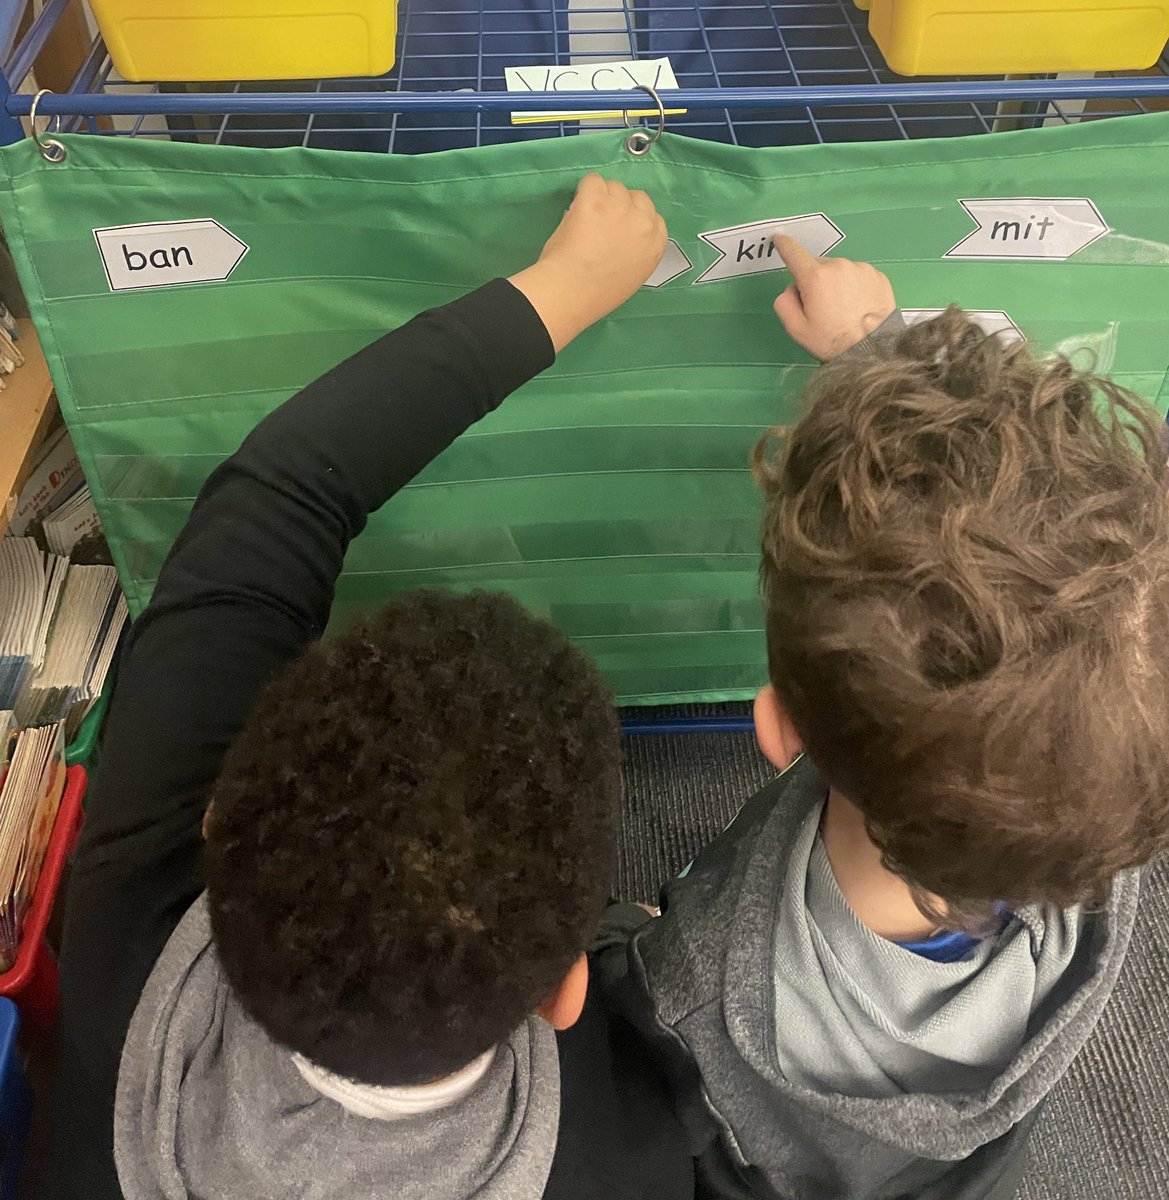 Ss building and writing 2 syllable words while I progress monitor. I love hearing the giggles of the nonsense words they read in the quest to make real words. #structuredliteracy #progressmonitoring #workstations